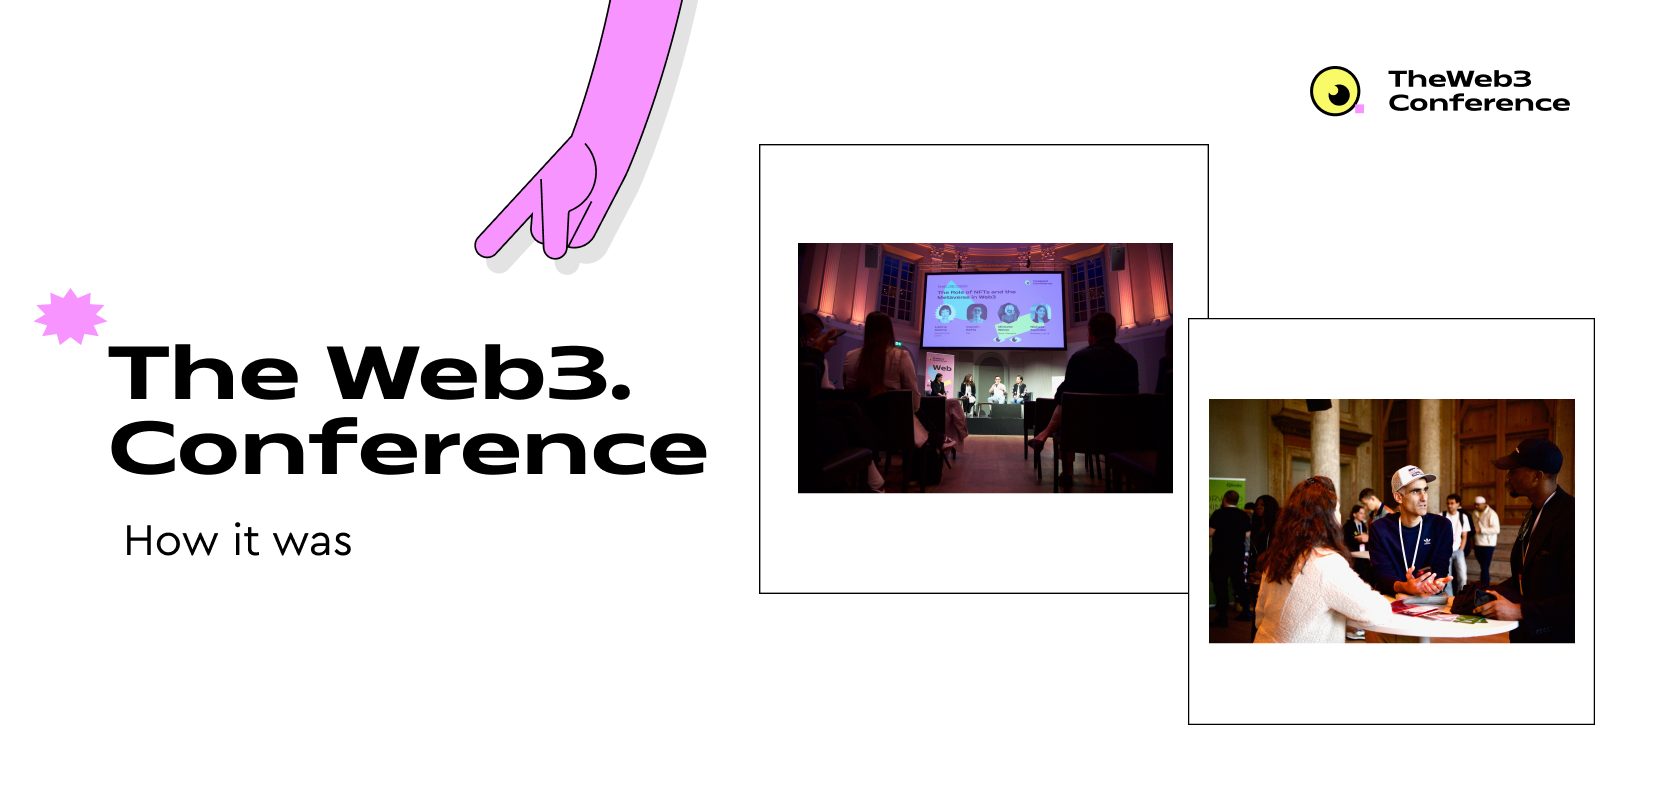 THE WEB3.CONFERENCE: HOW WAS IT?